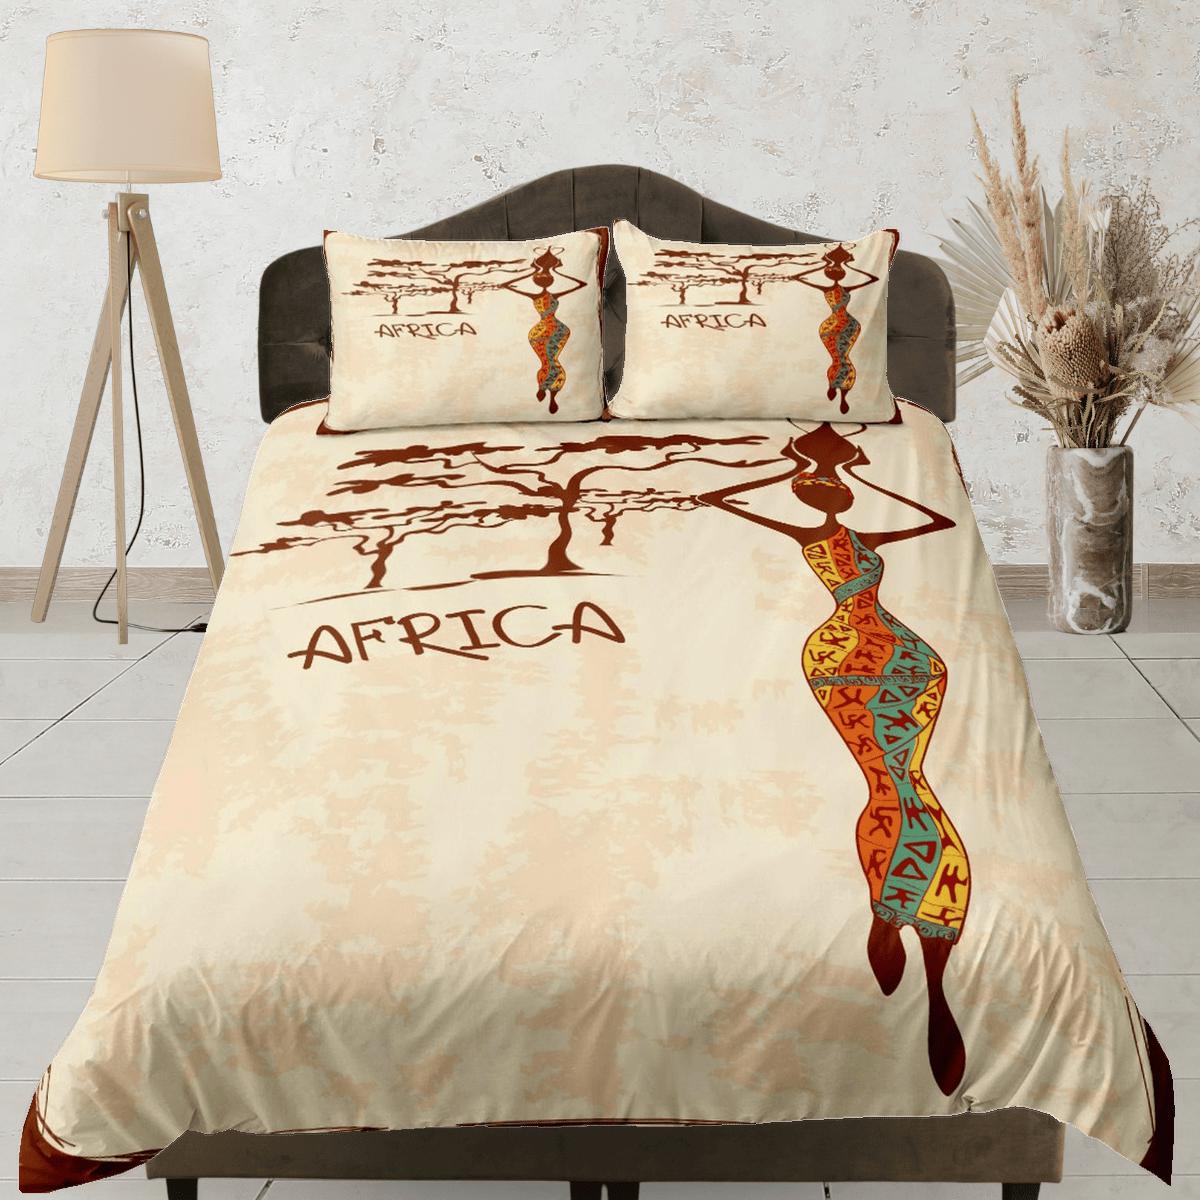 daintyduvet African black woman in traditional dress bedding duvet cover, boho bedding set african ethnic design, afrocentric bedding south african gift